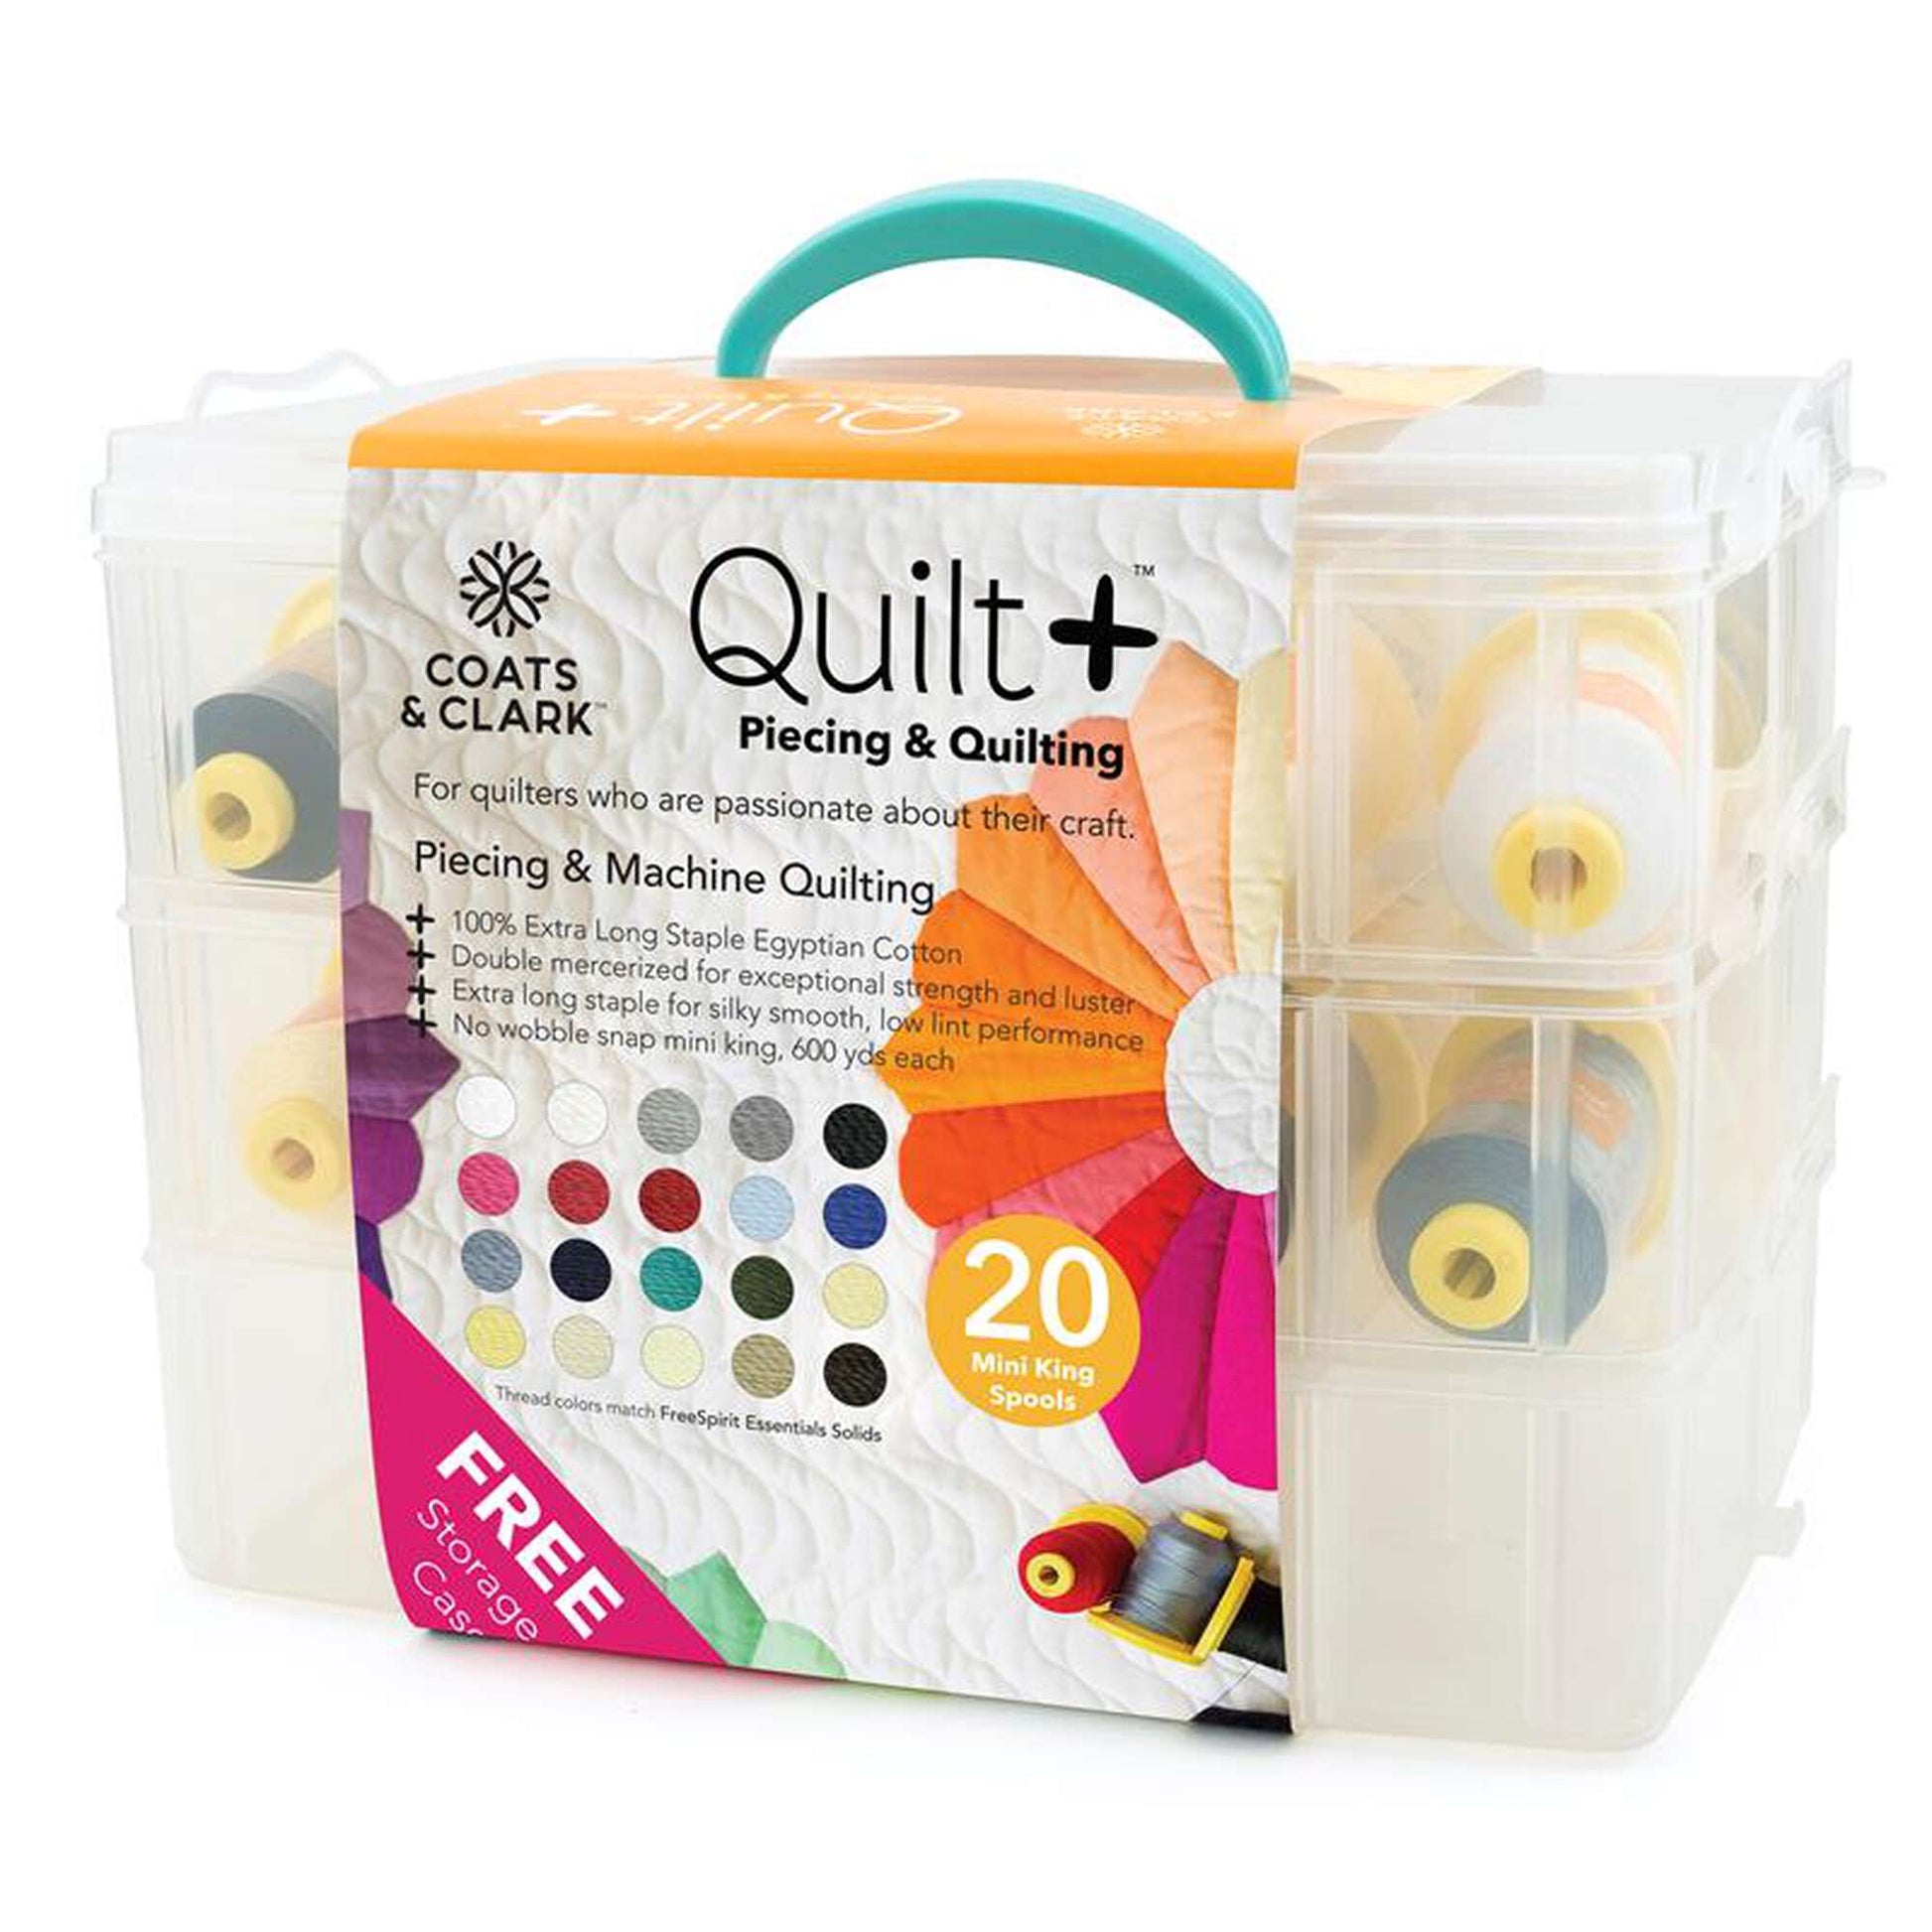 Coats & Clark Quilt + Piecing & Quilting Thread with Storage Box - Discontinued Items